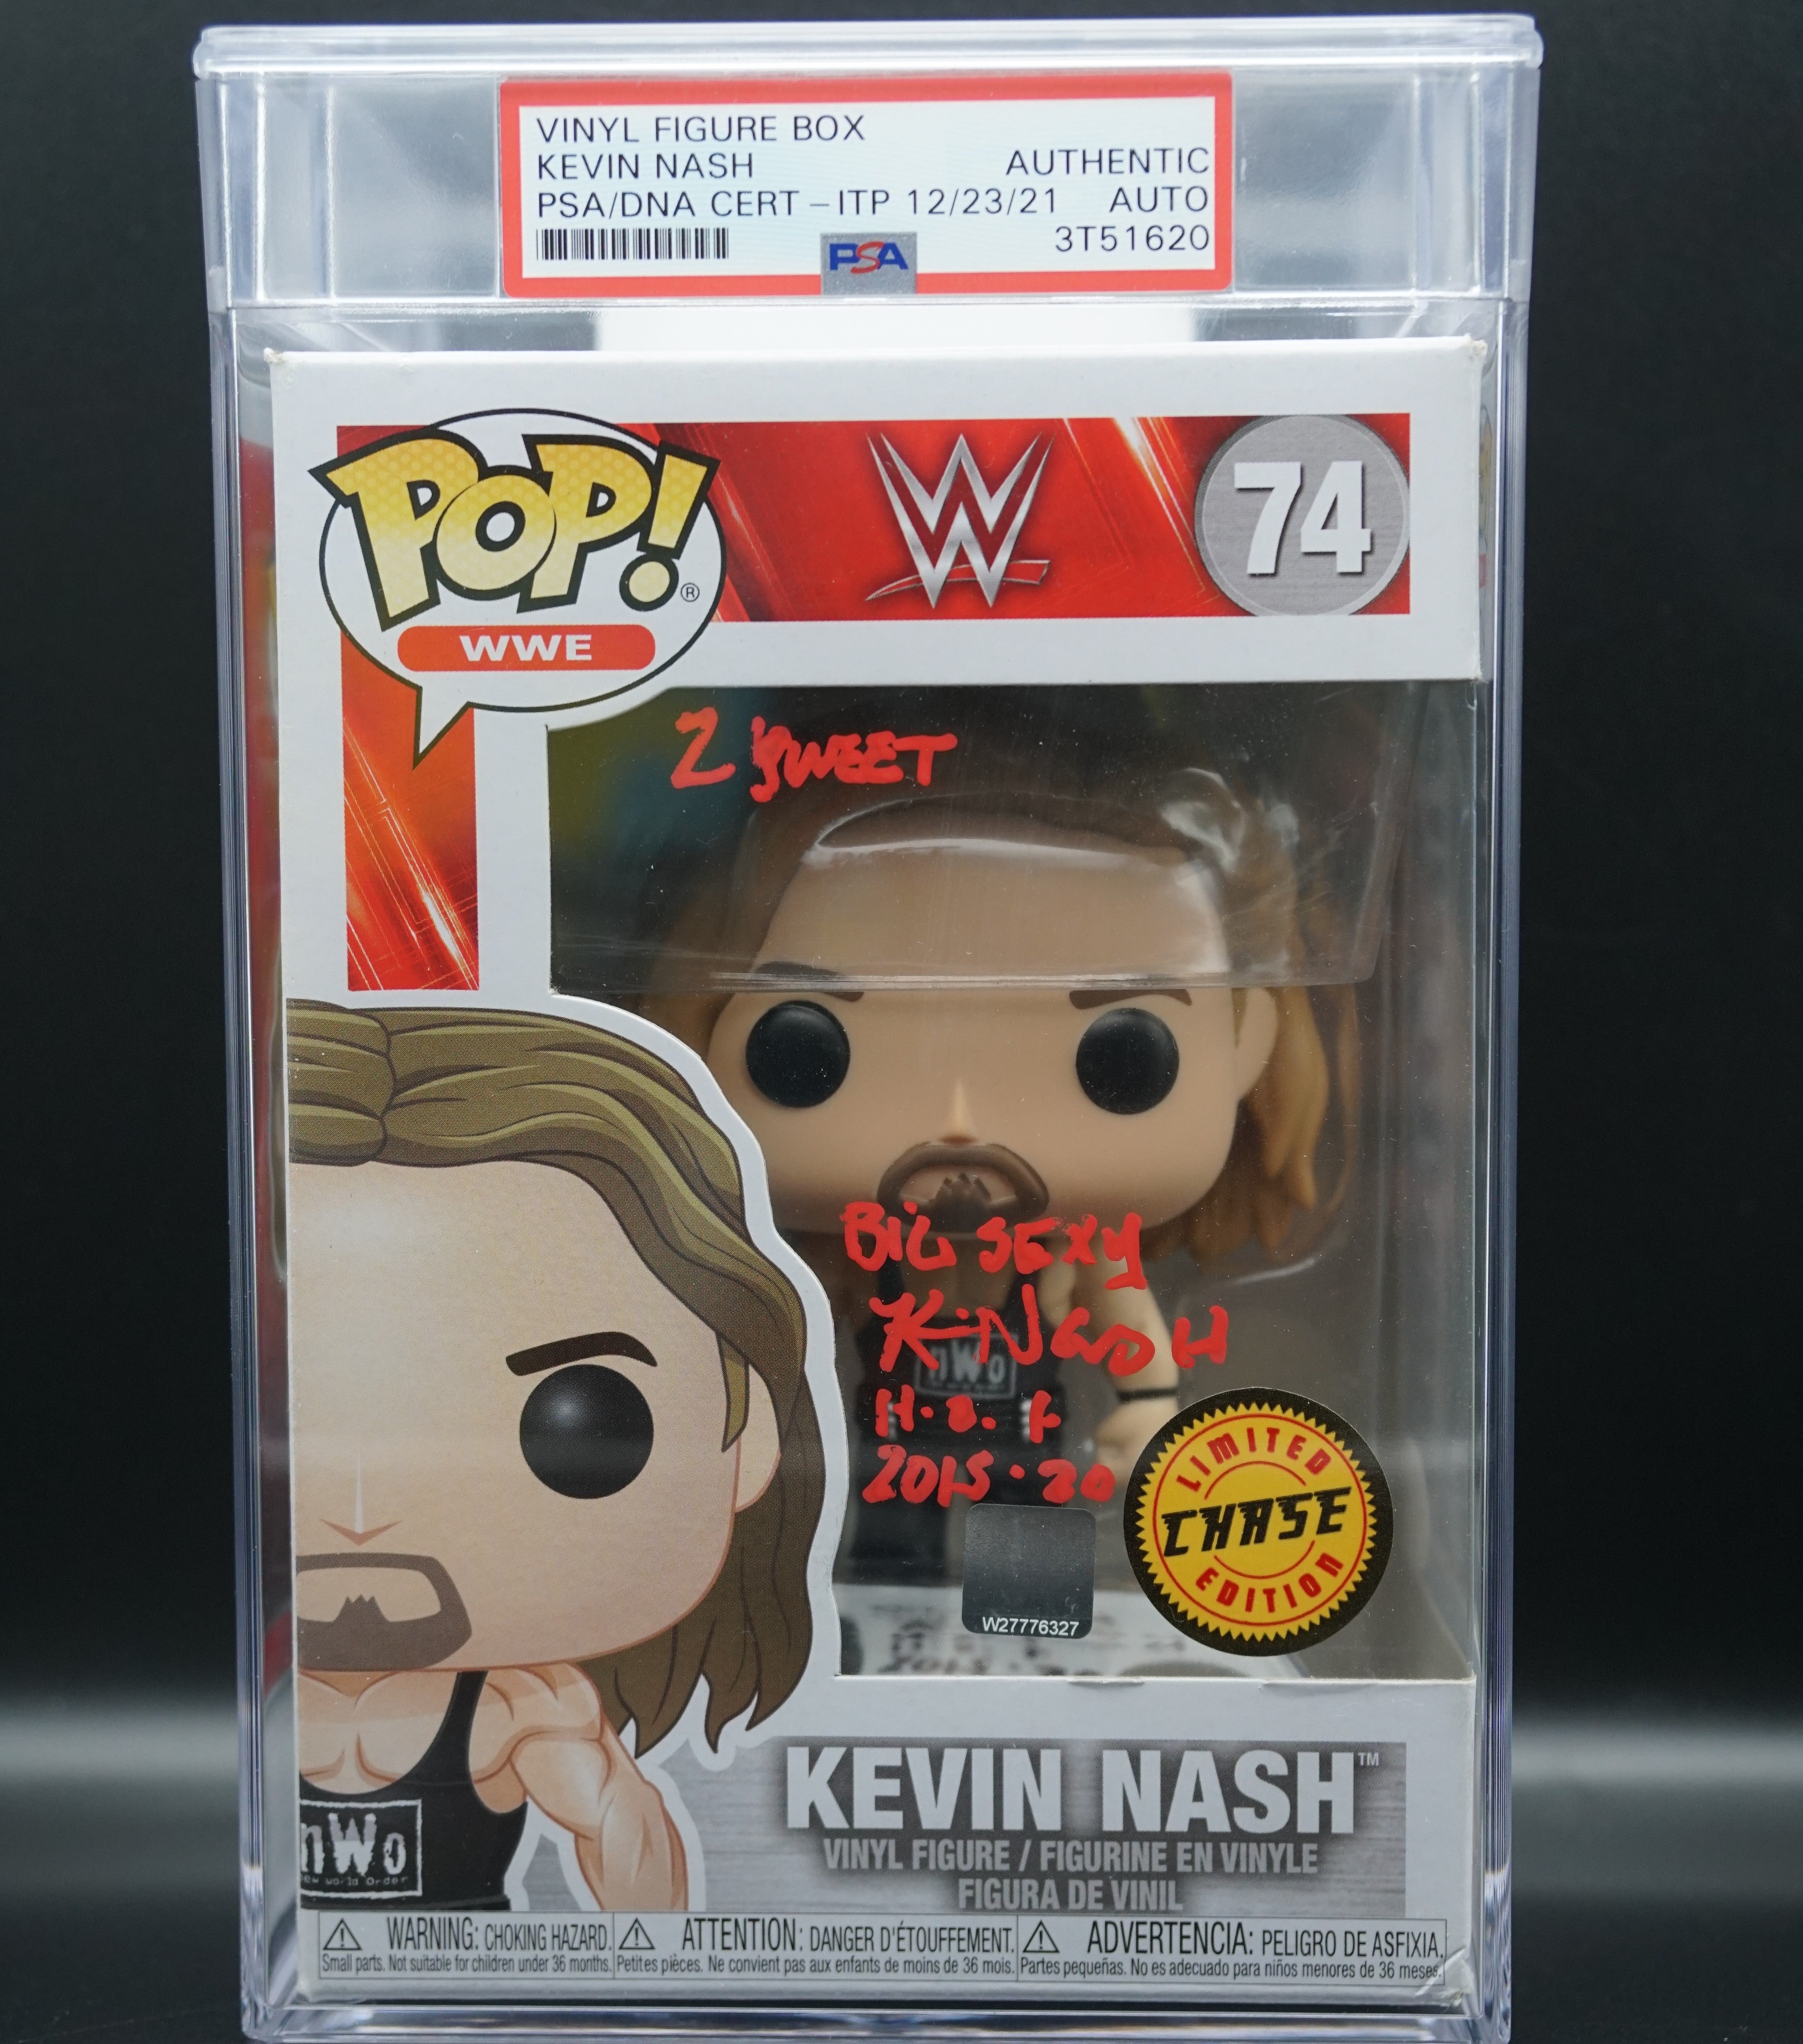 Encapsulated WWE Kevin Nash Pop#74 Limited Chase Edition with inscriptions "2 sweet, Big sexy , H.O.F. 2015-20" - Signed by Kevin Nash